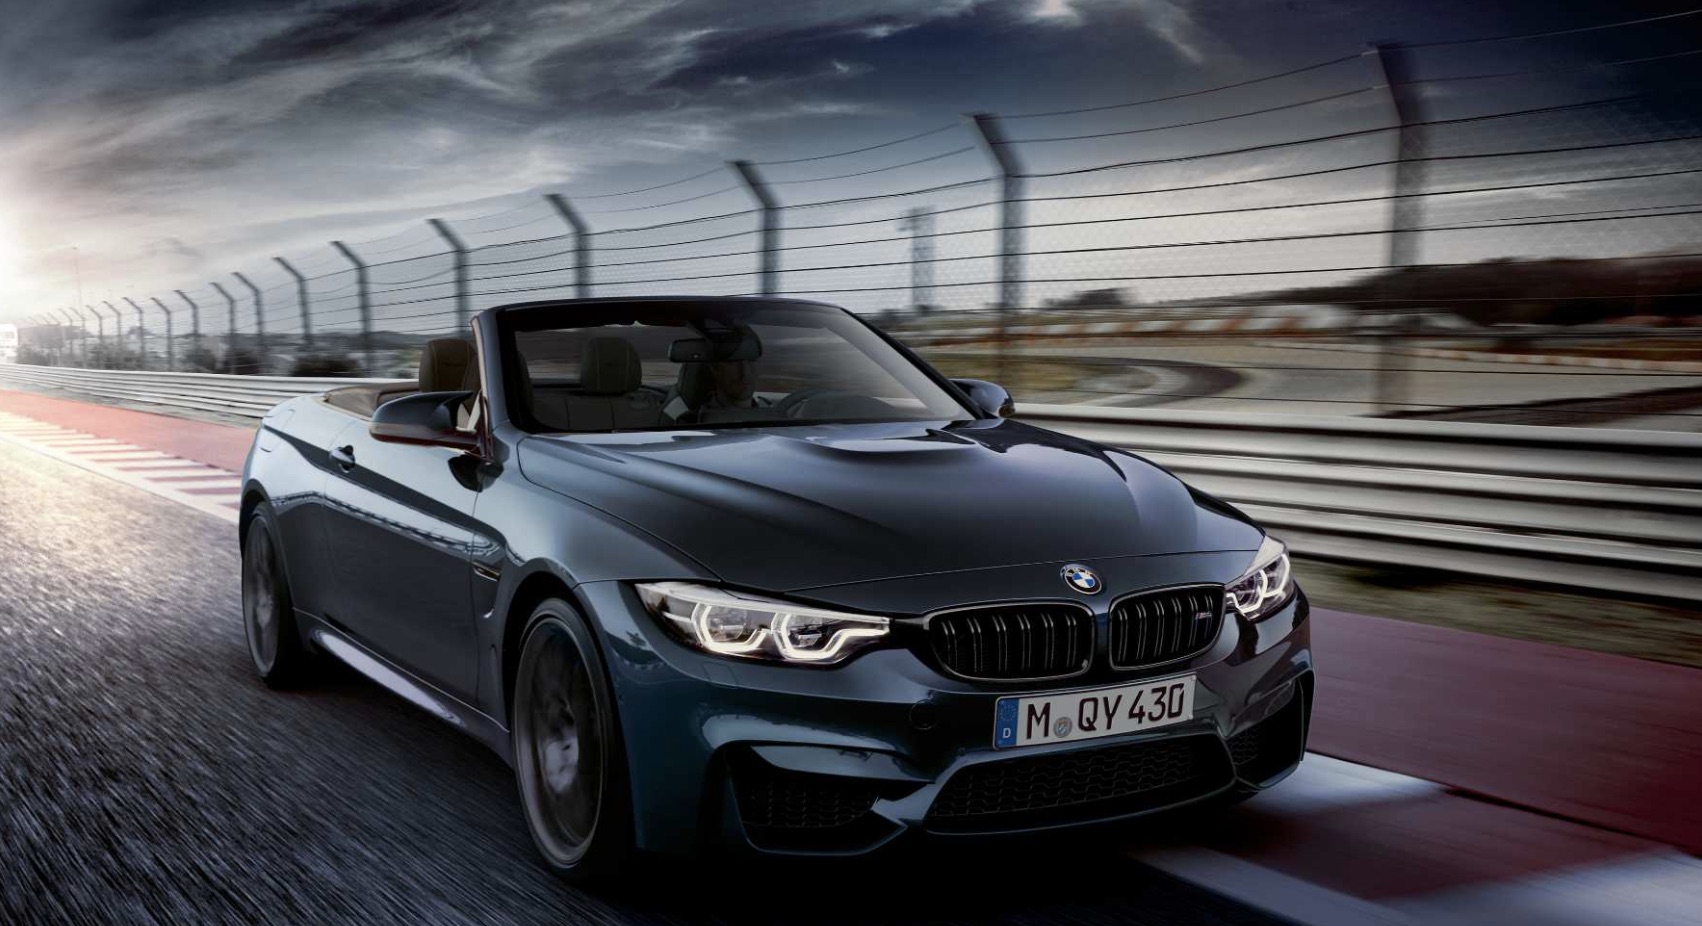 BMW M4 Convertible 30 Jahre Edition marks 30 years since the first M3 drop-top ...1702 x 926